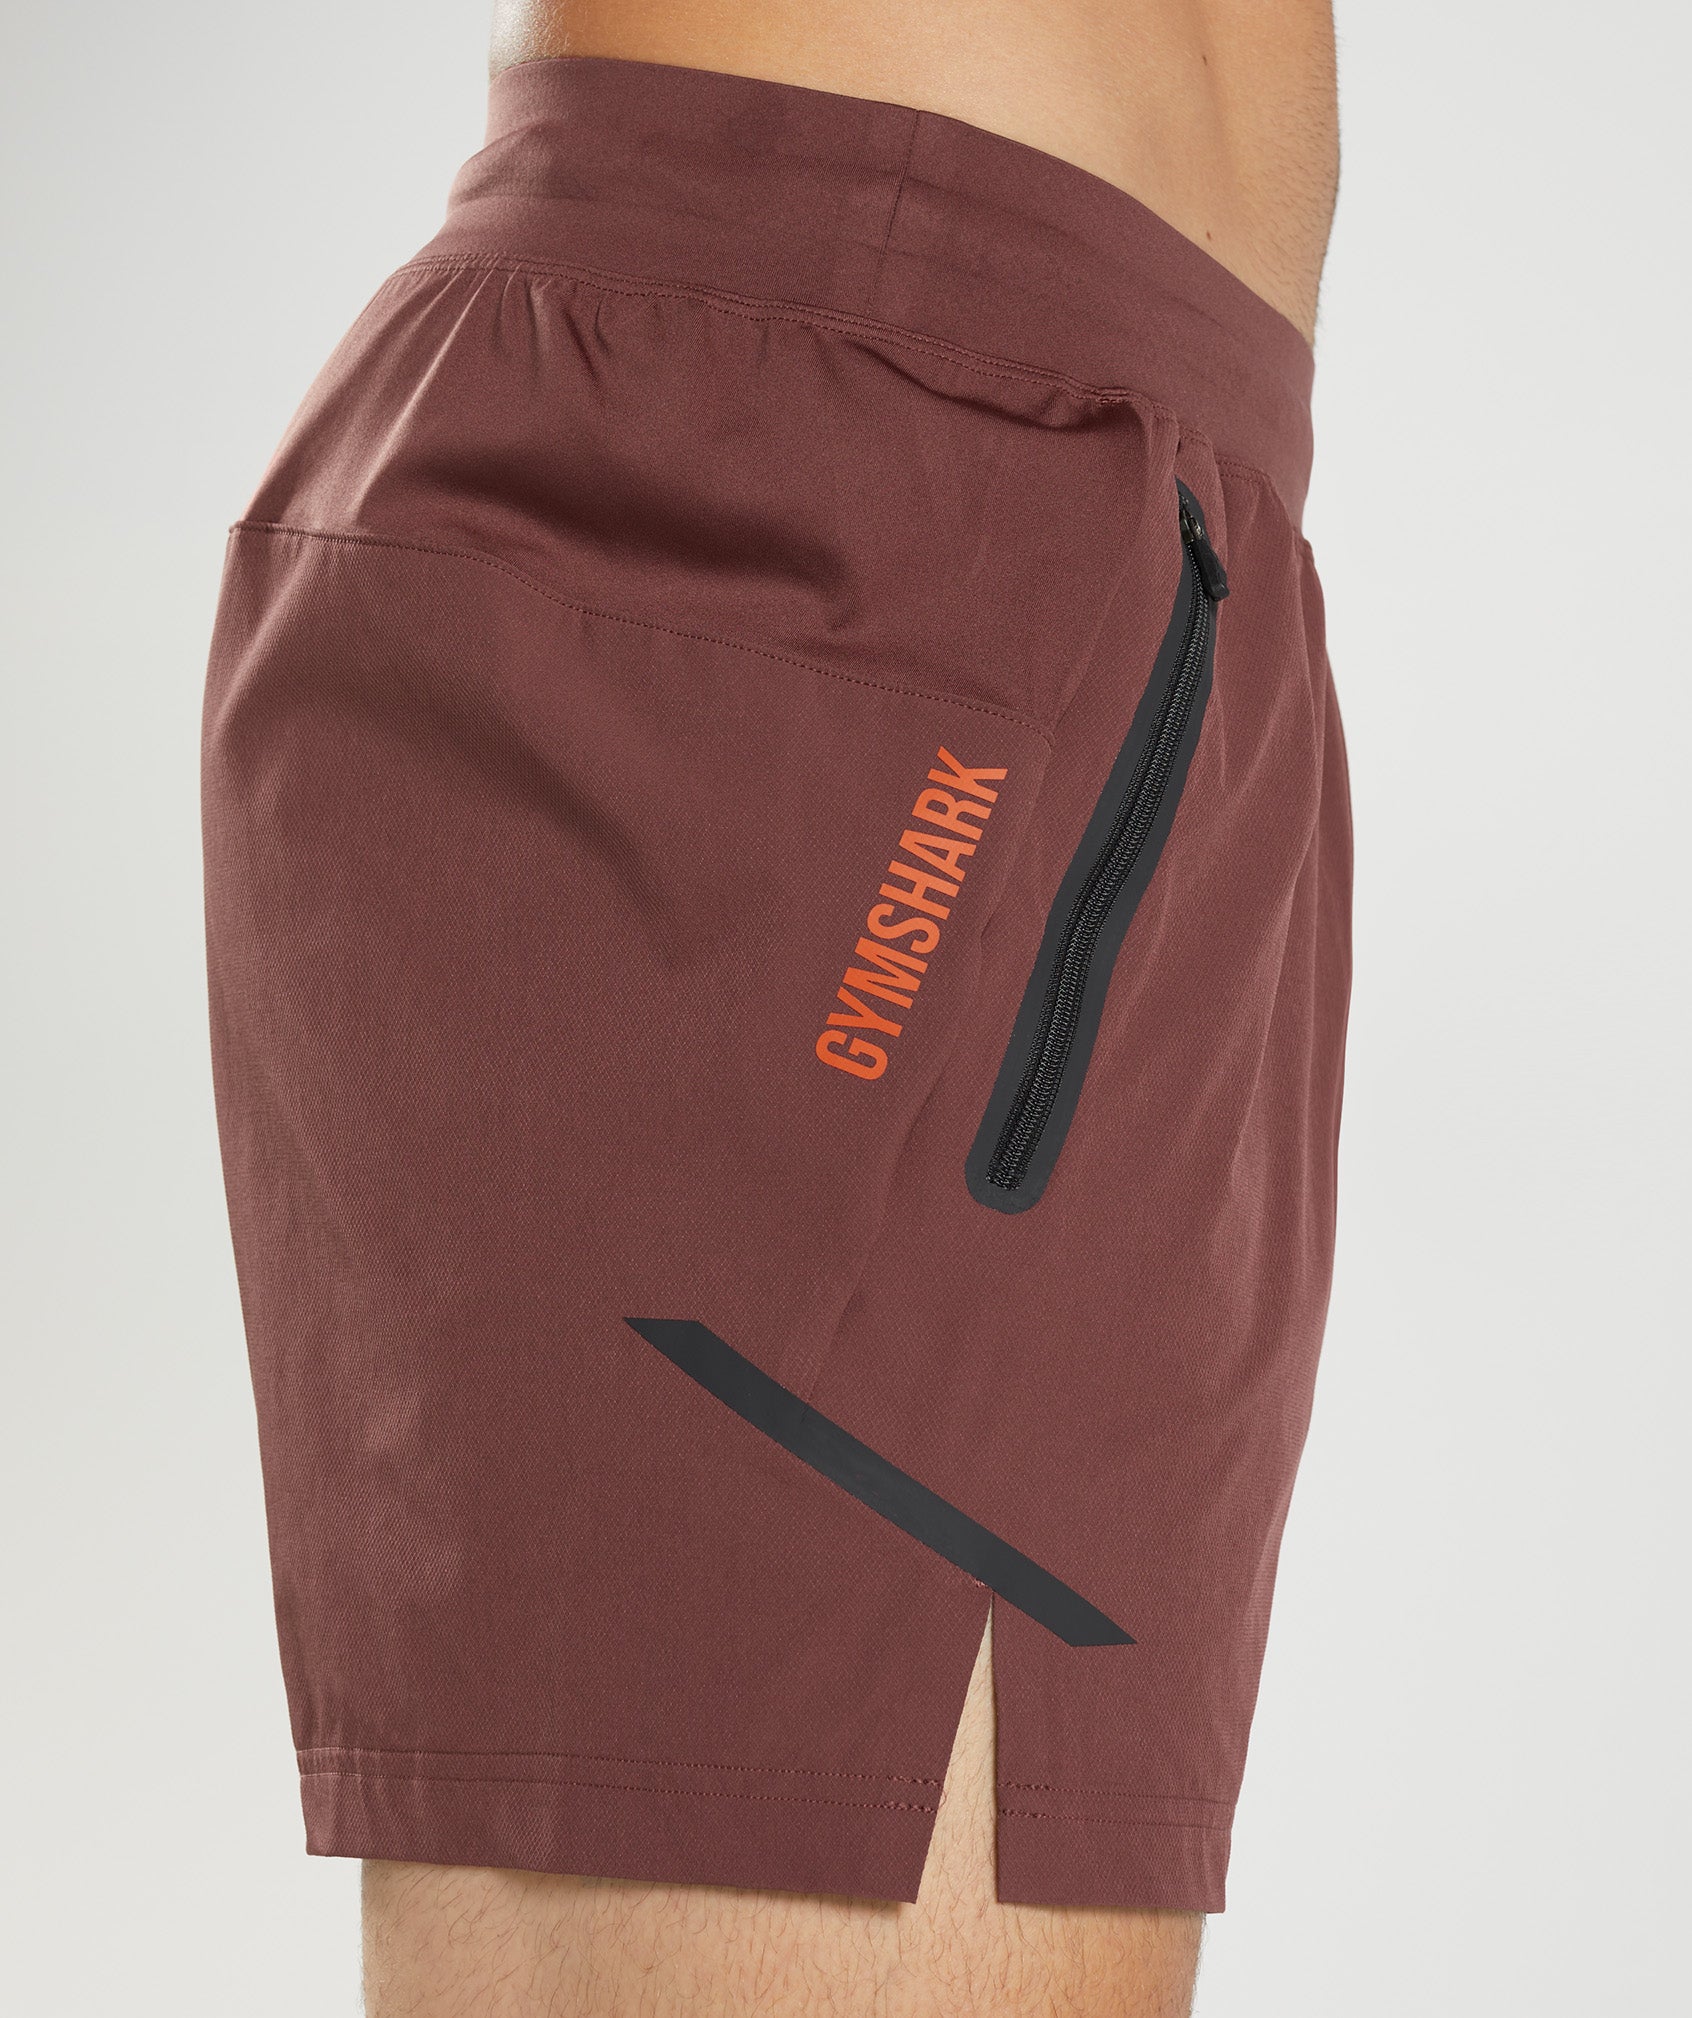 Apex 5" Perform Shorts in Cherry Brown - view 6